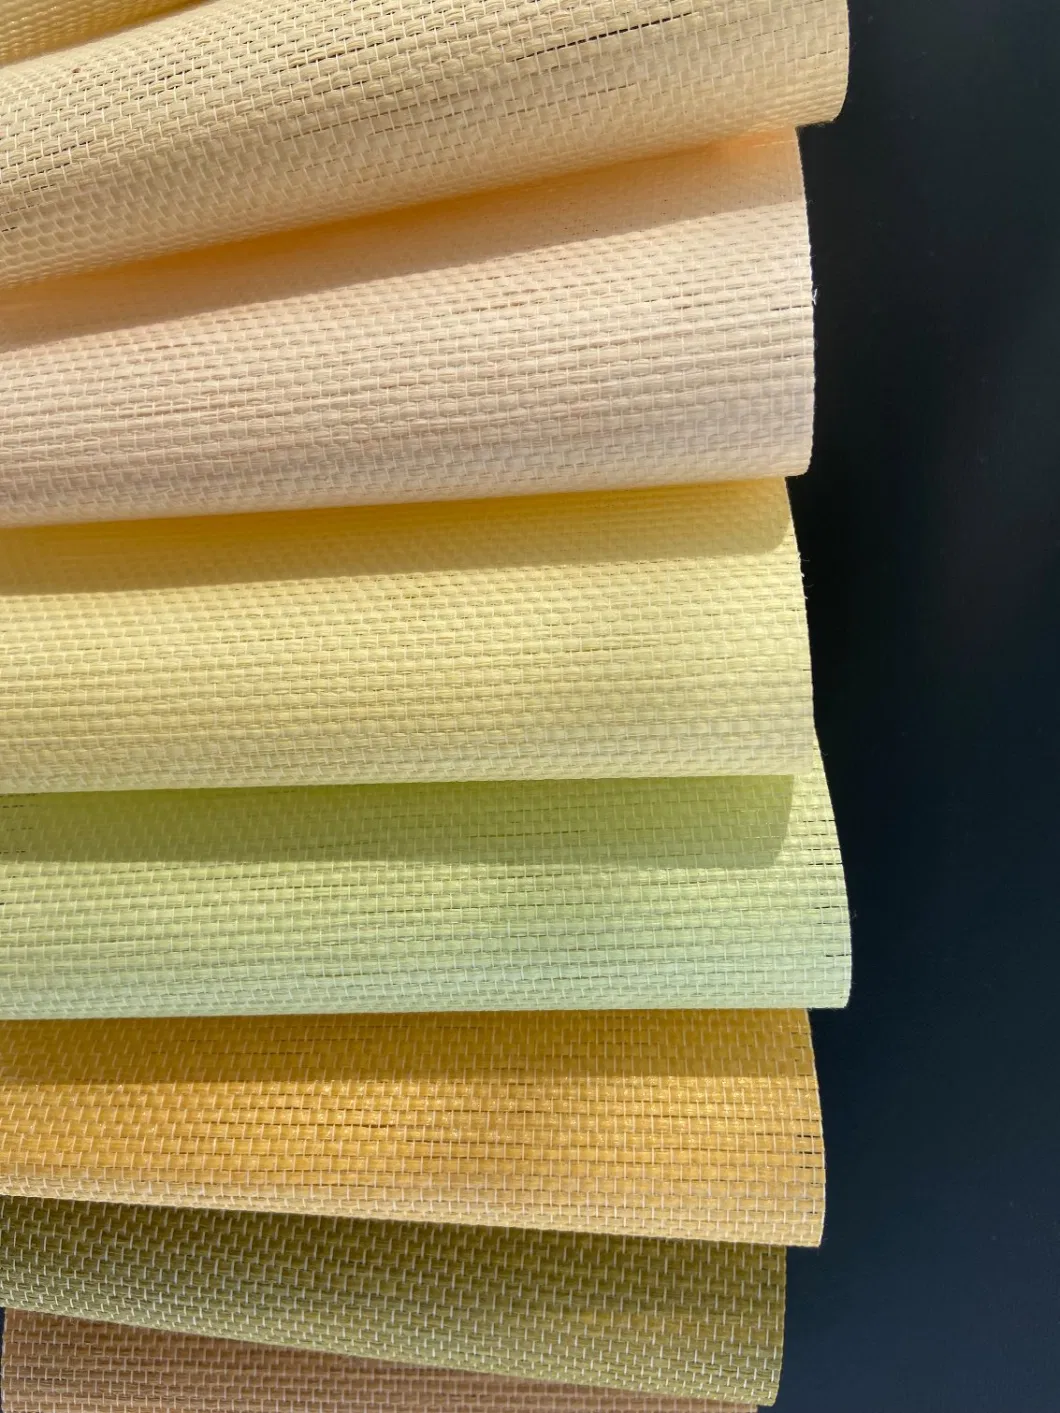 Polyester Linen Roller Blinds, Bamboo Shade for Home Decorations, Restaurant Roll up